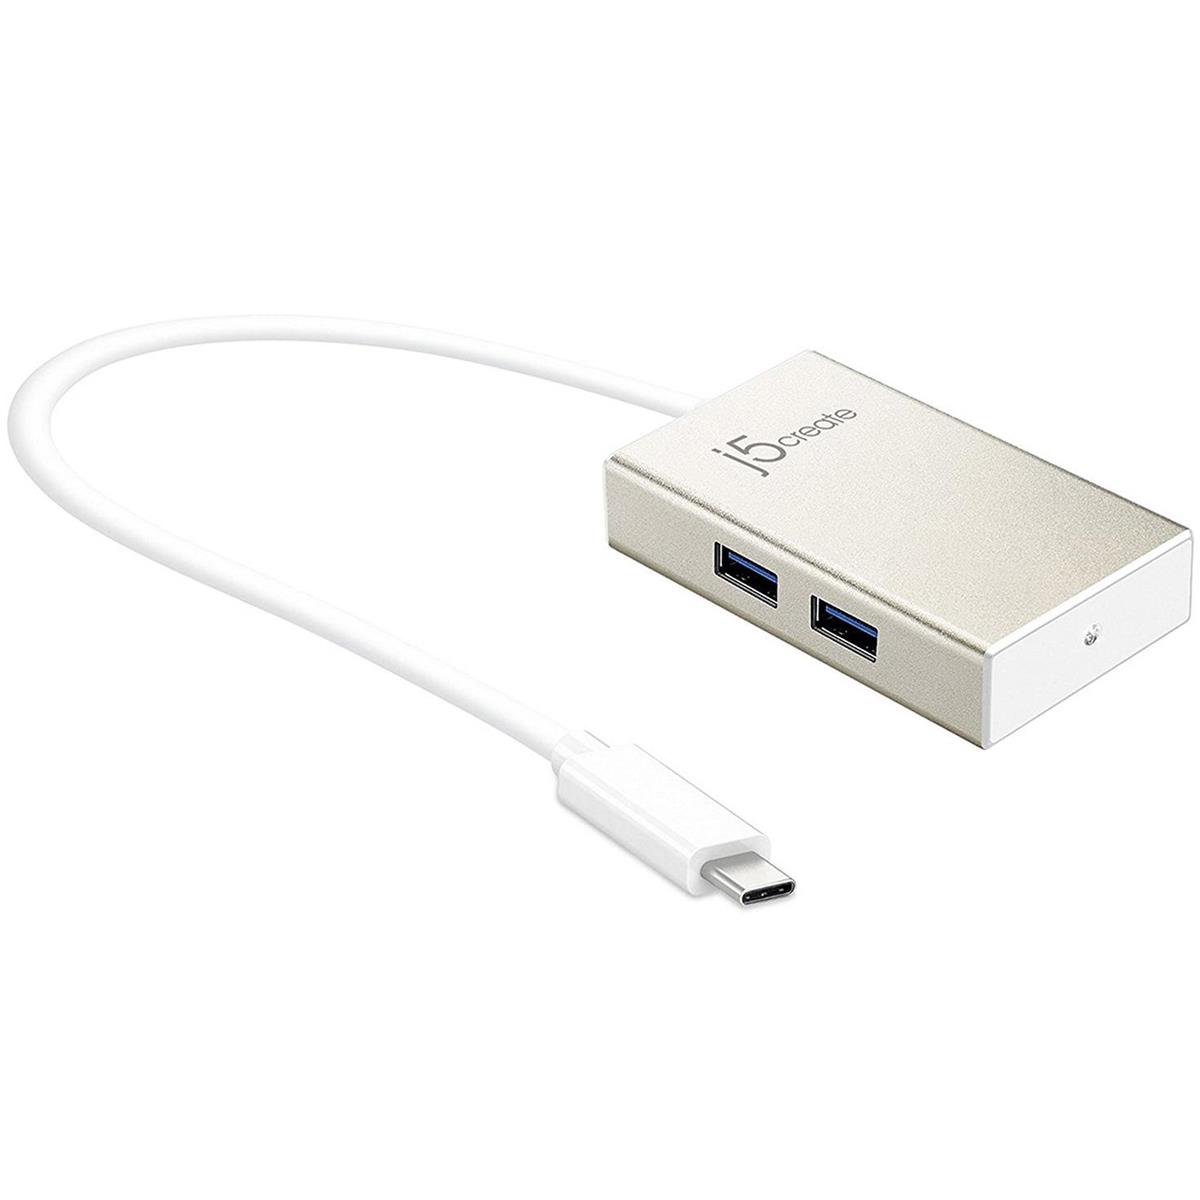 Image of J5 Create 4-Port USB 3.0 Type-A Hub with USB Type-C Connector